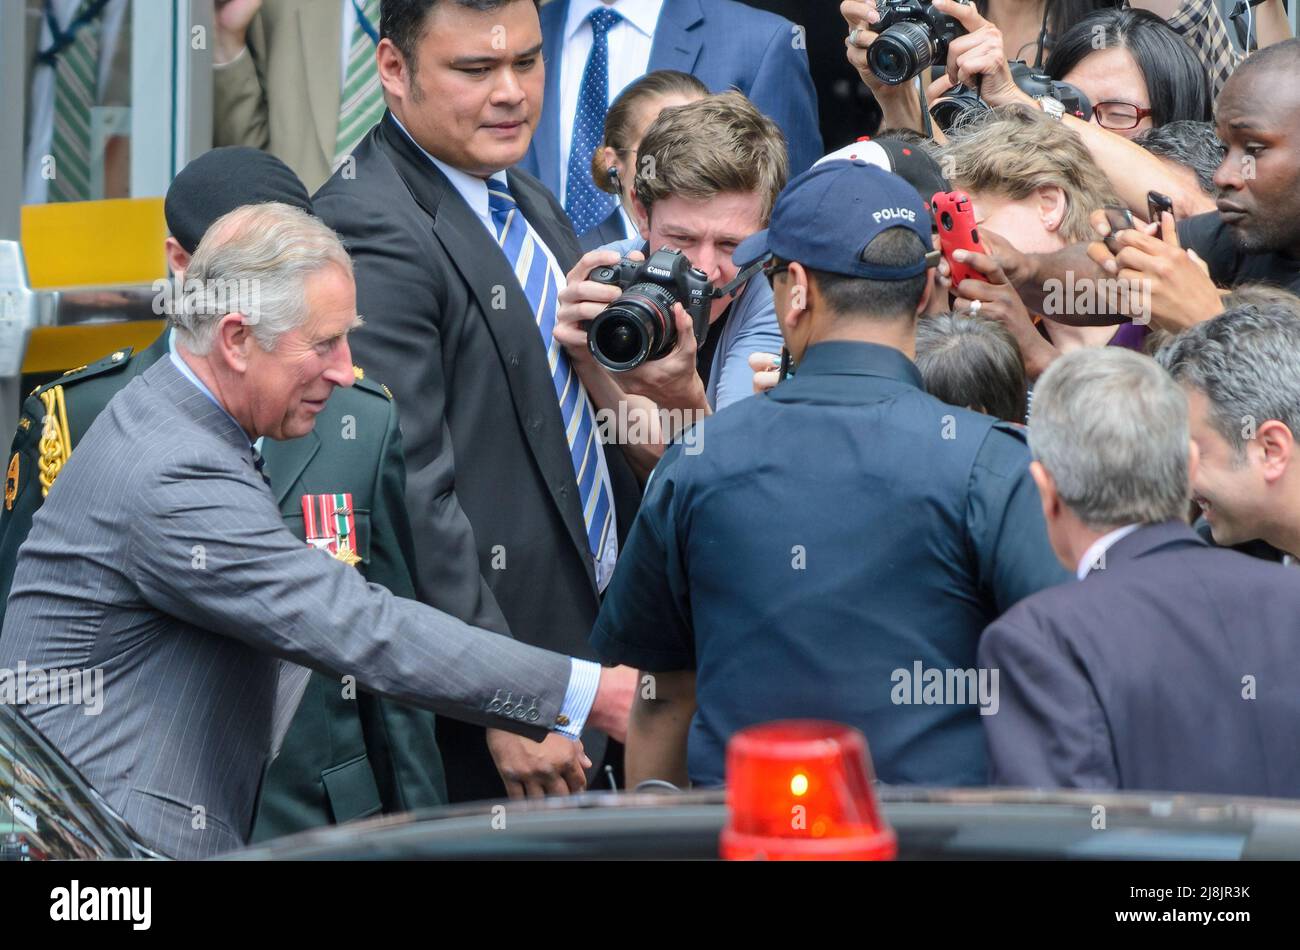 Toronto, Canada - May 22, 2012: Prince Charles visit Ryerson University. The visit was part of the Queen's Diamond Jubilee celebrations. Stock Photo